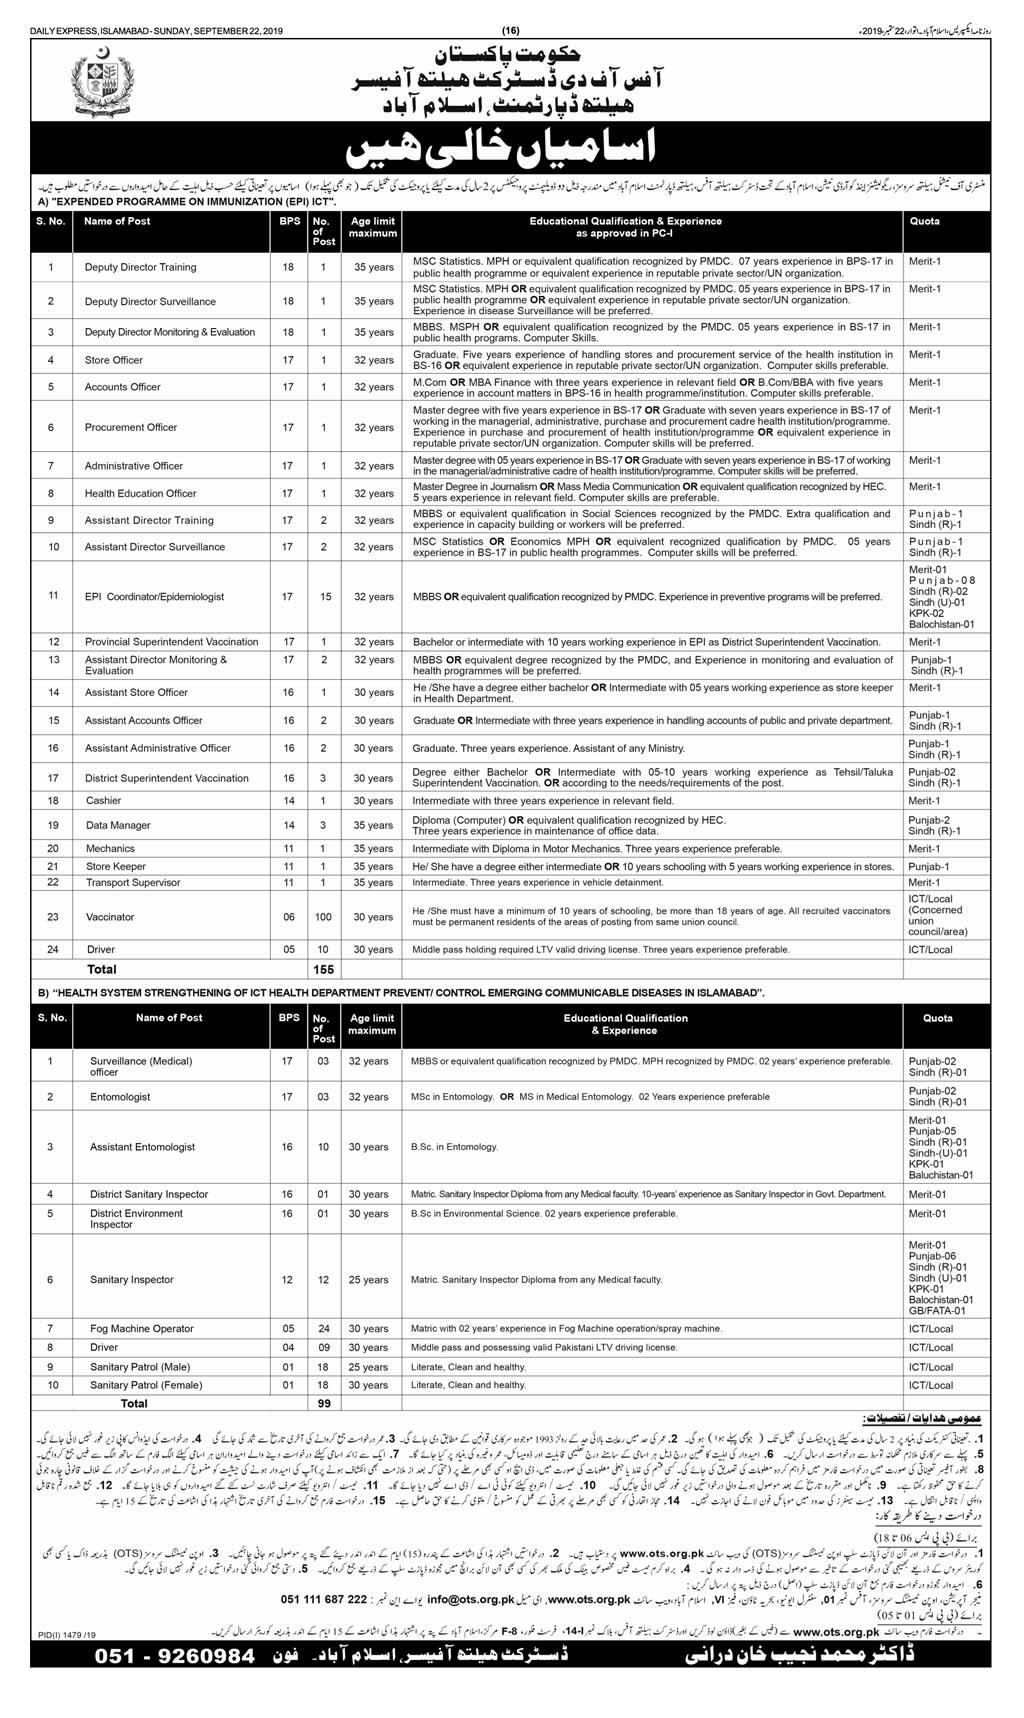 Ministry of National Health Services Regulation Coordination NHSRC Jobs OTS Test Roll No Slip